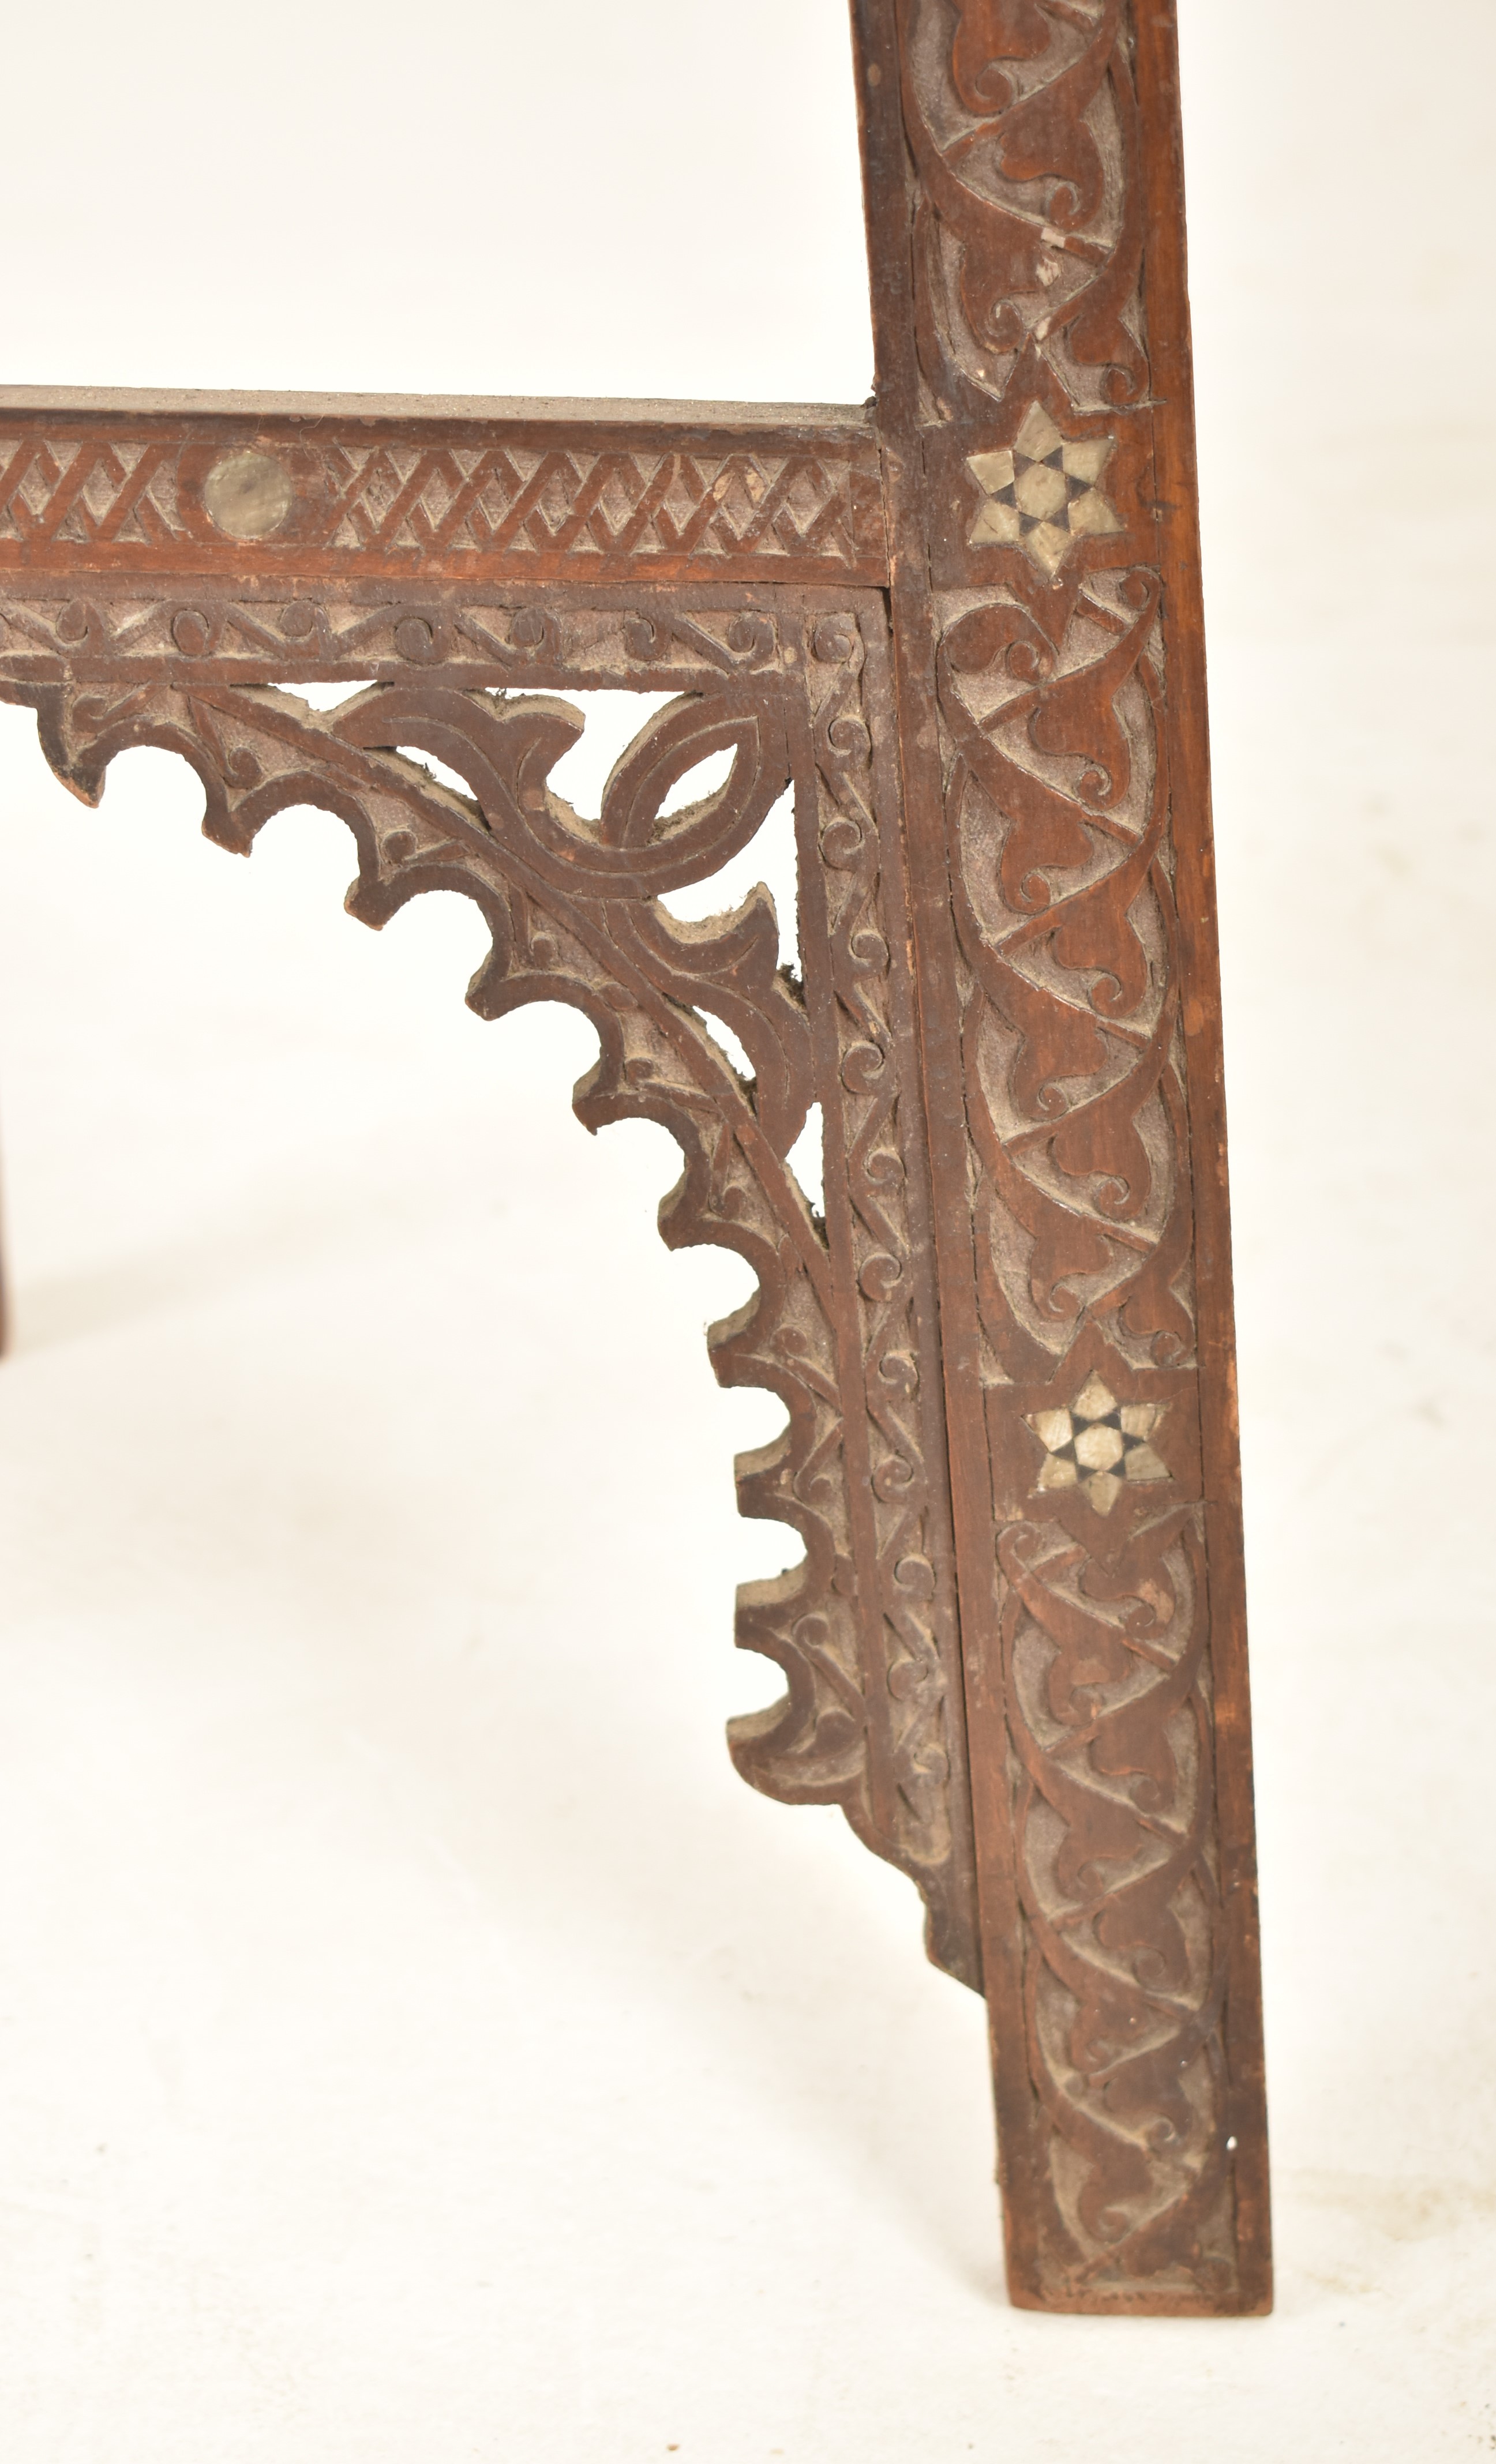 MOORISH 19TH CENTURY CARVED WOOD & MOTHER OF PEARL EASEL - Image 4 of 5